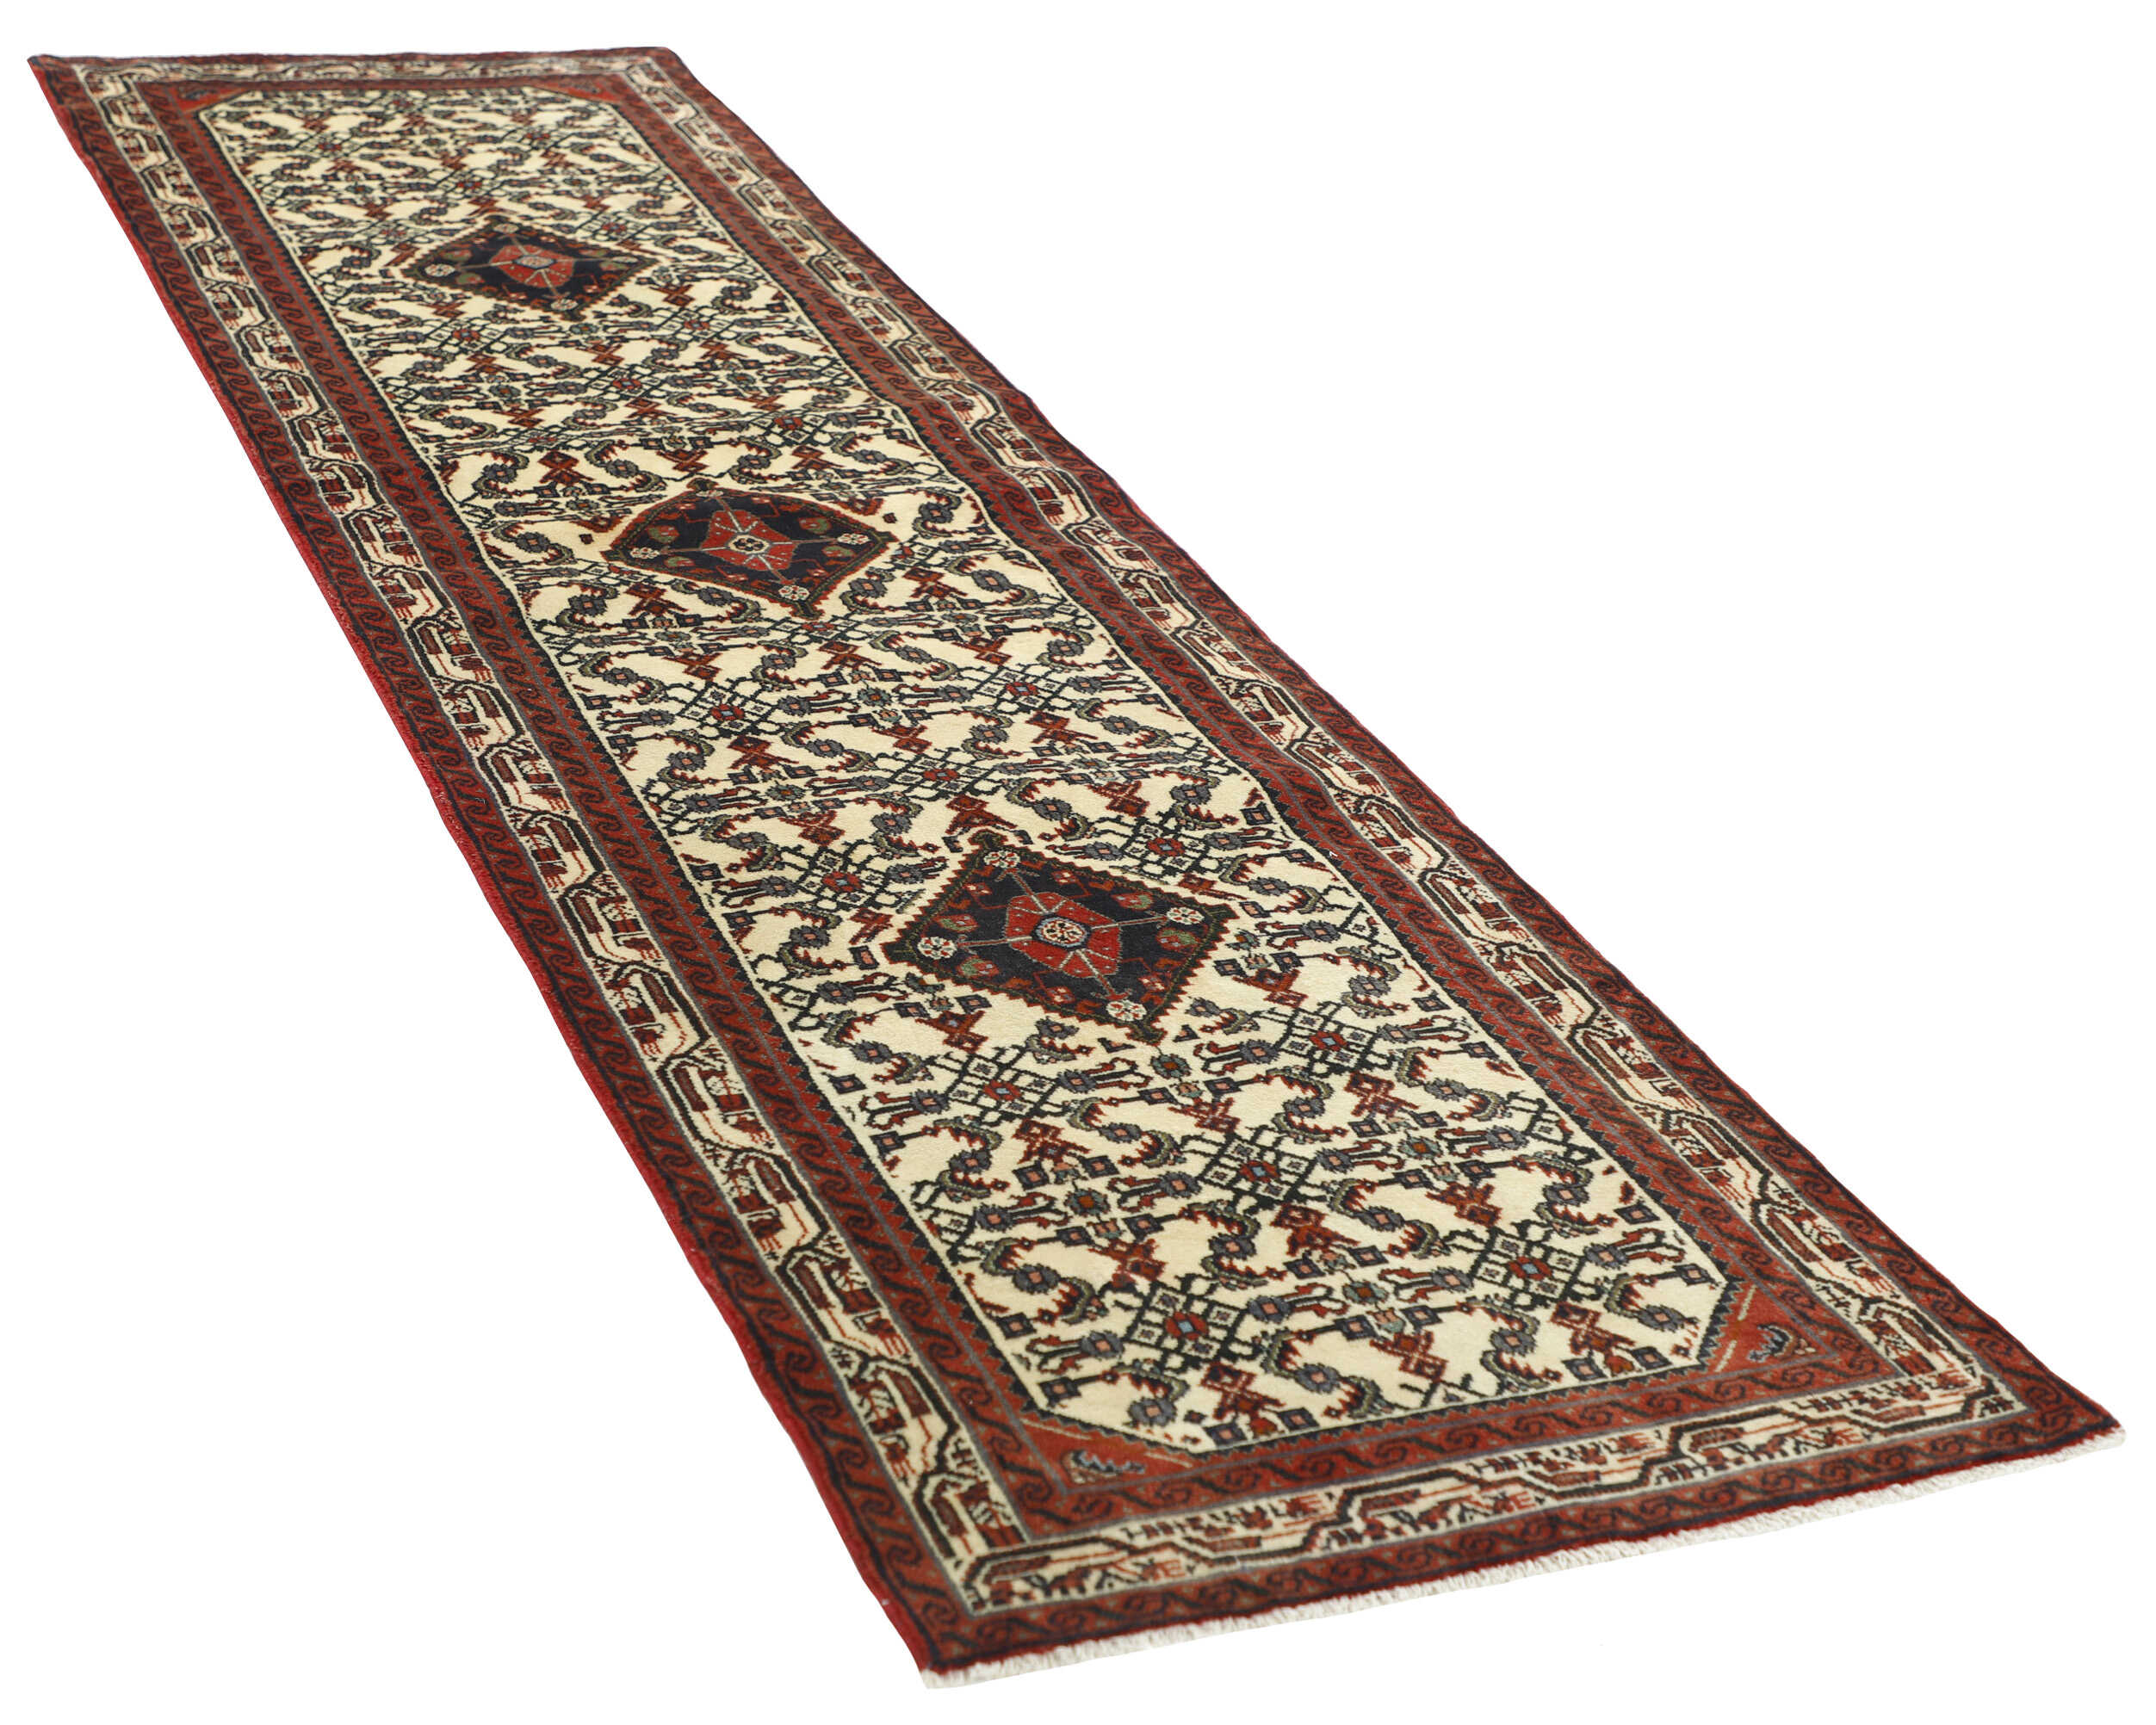 Authentic Persian runner with traditional floral pattern in red and black